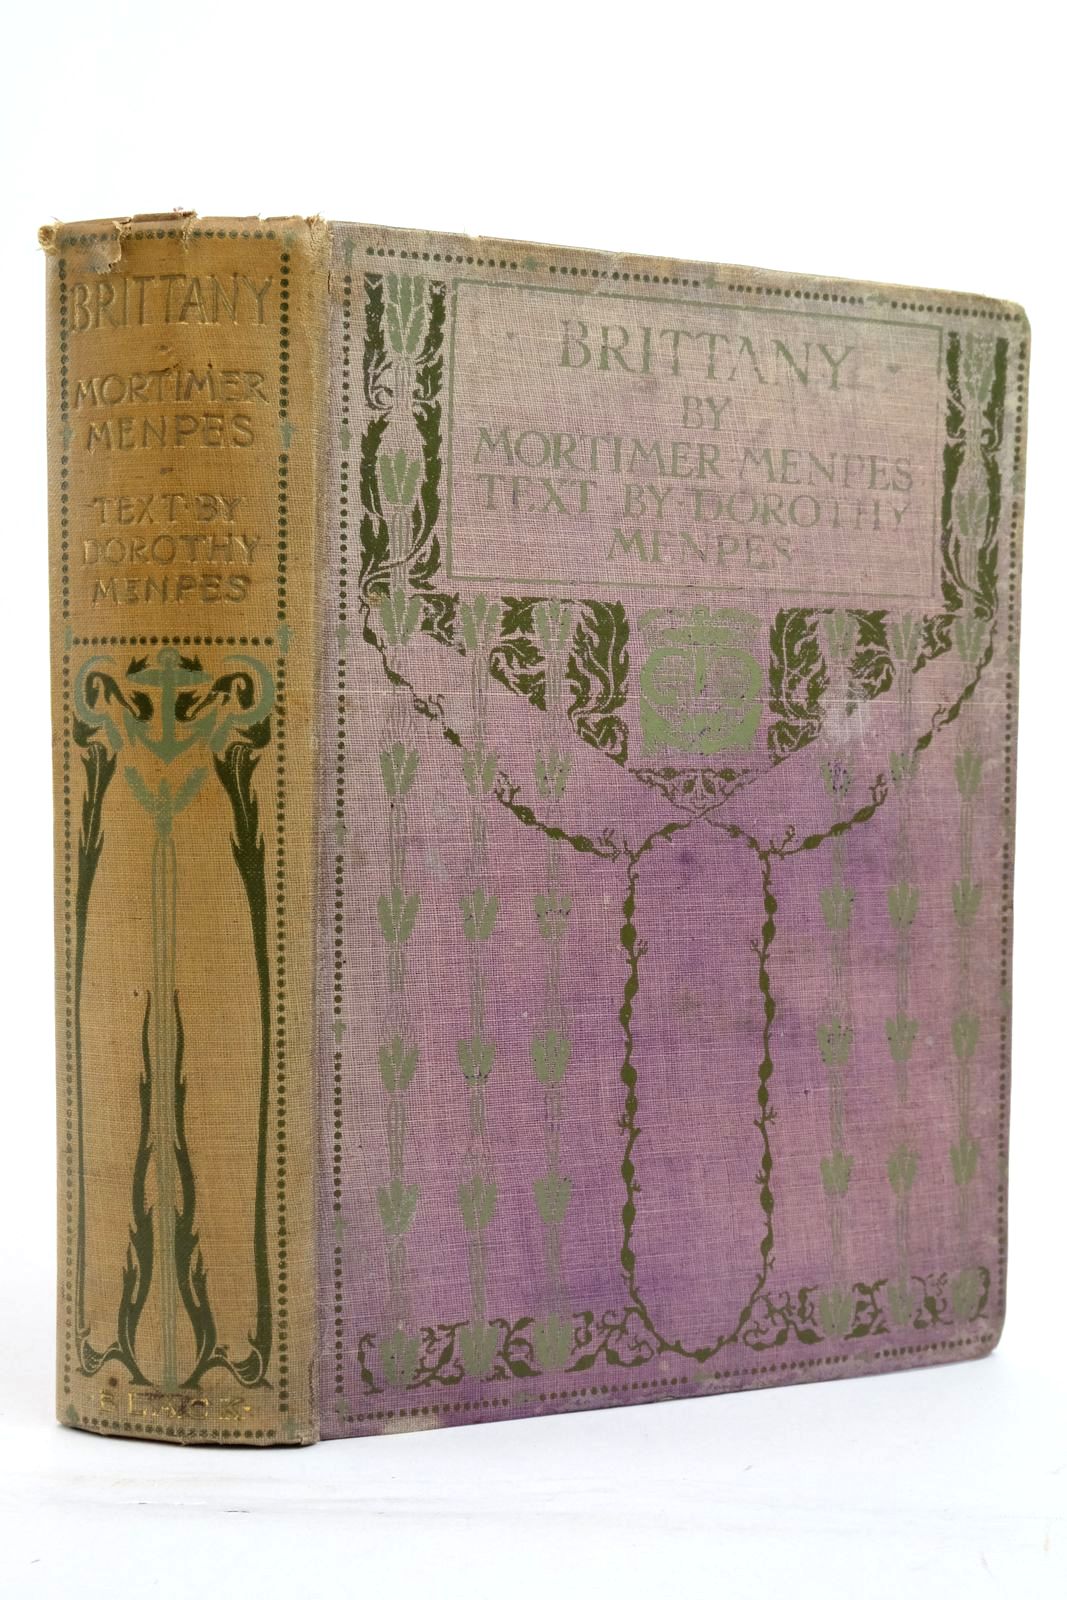 Photo of BRITTANY written by Menpes, Dorothy illustrated by Menpes, Mortimer published by Adam &amp; Charles Black (STOCK CODE: 2137520)  for sale by Stella & Rose's Books